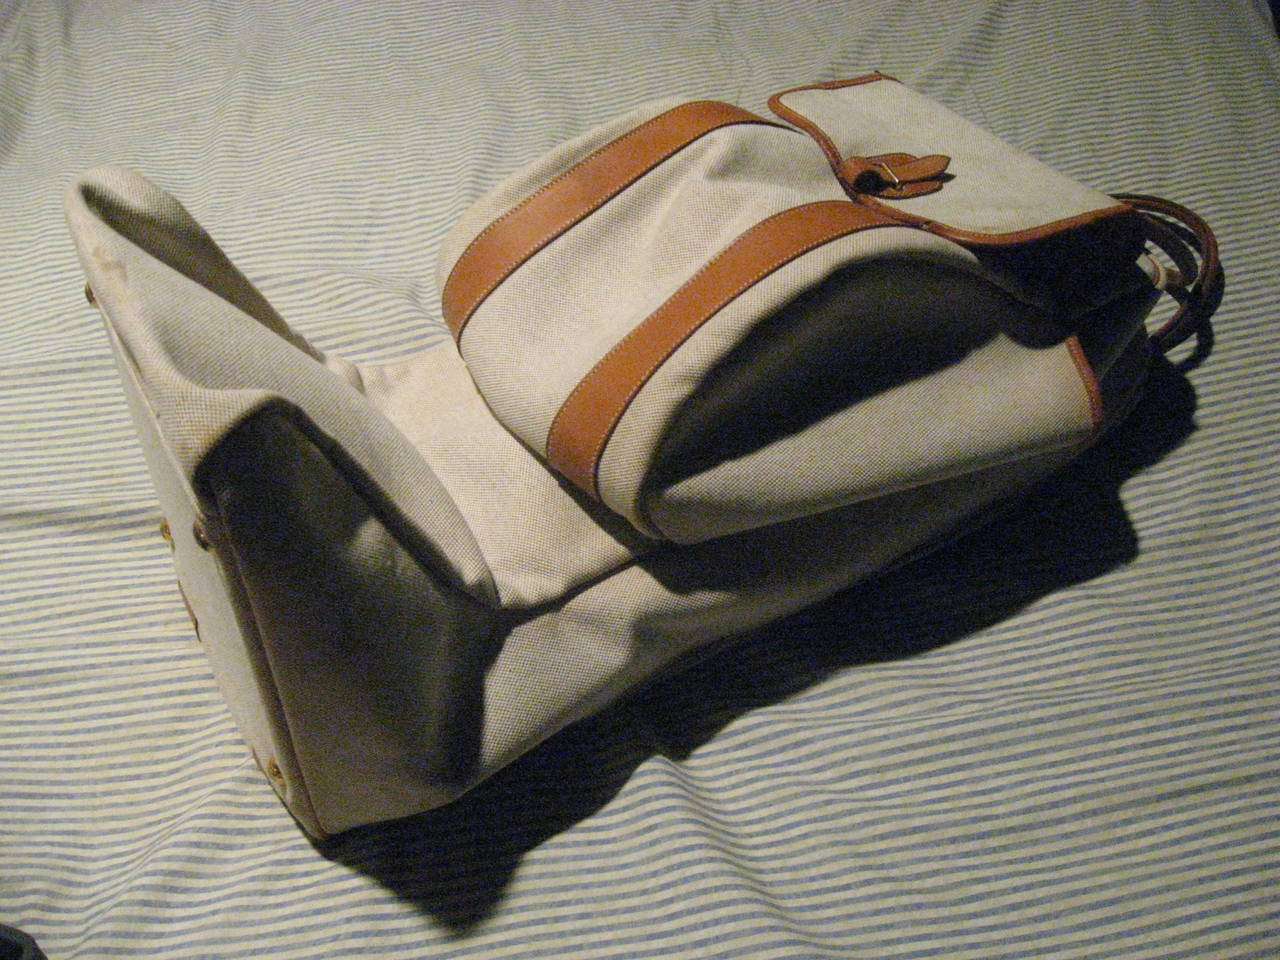 European Hermes Equestrian Vintage Canvas and Leather Bag